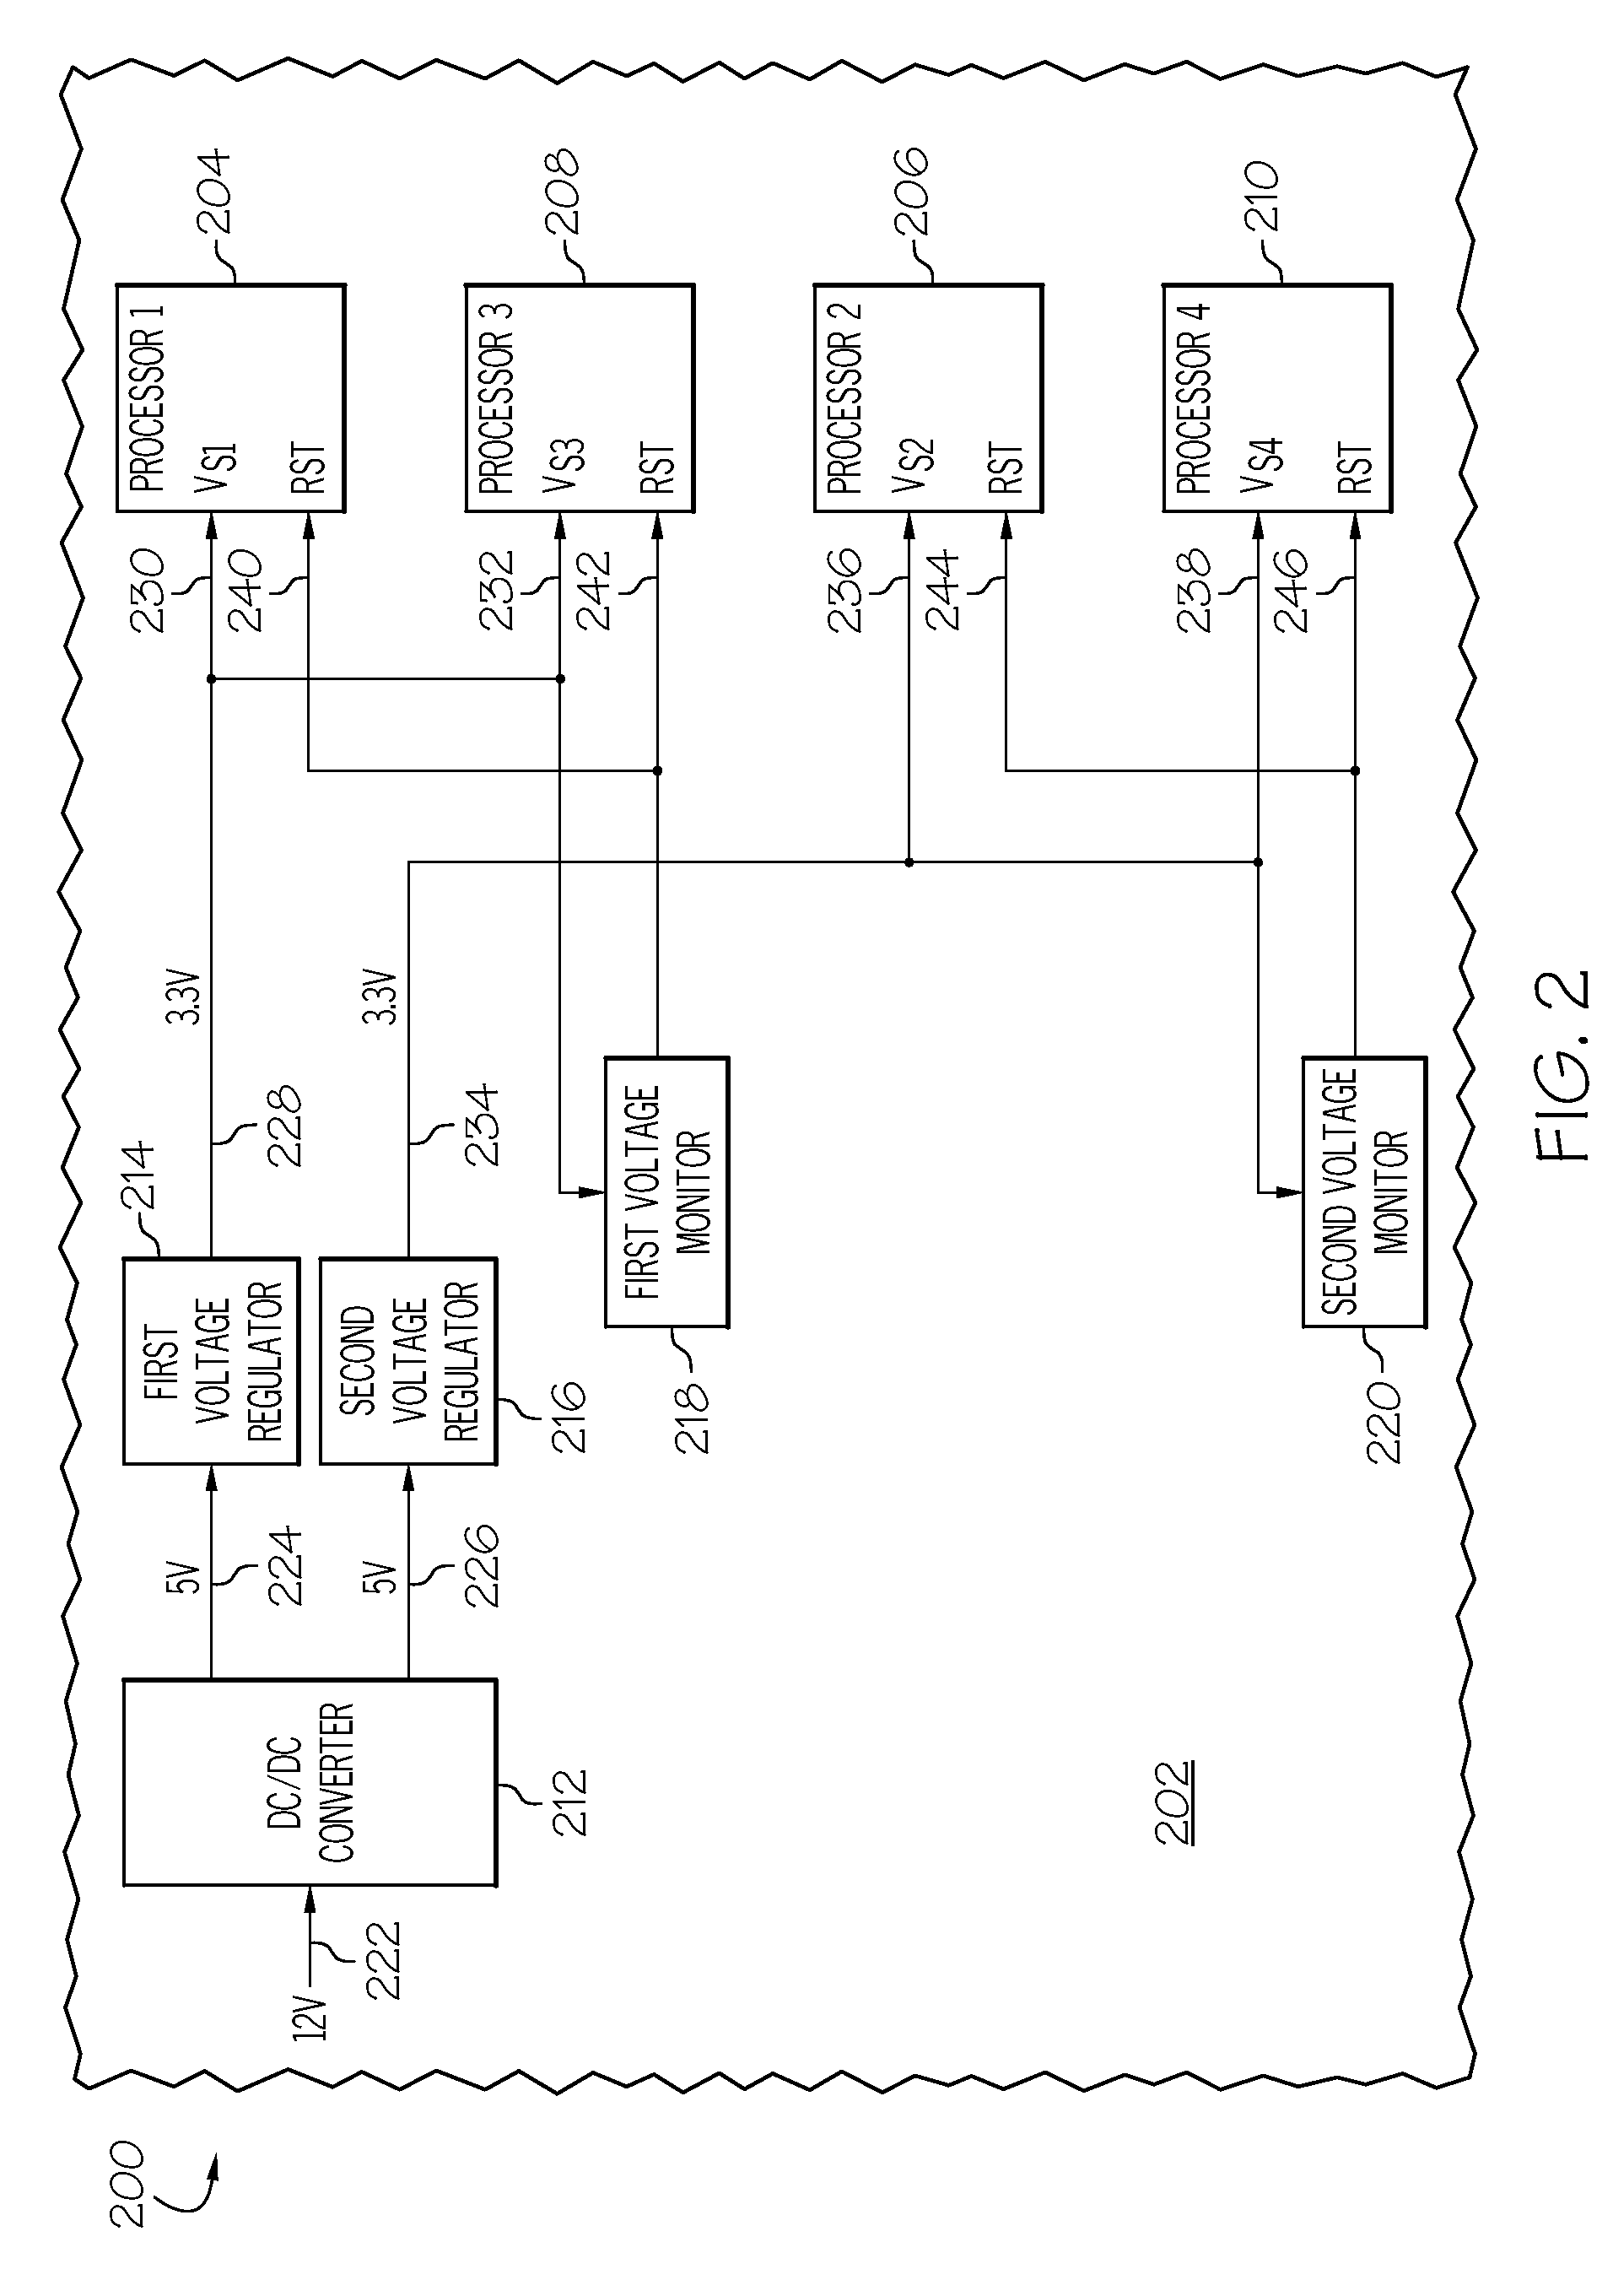 Power supply topology for a multi-processor controller in an electric traction system